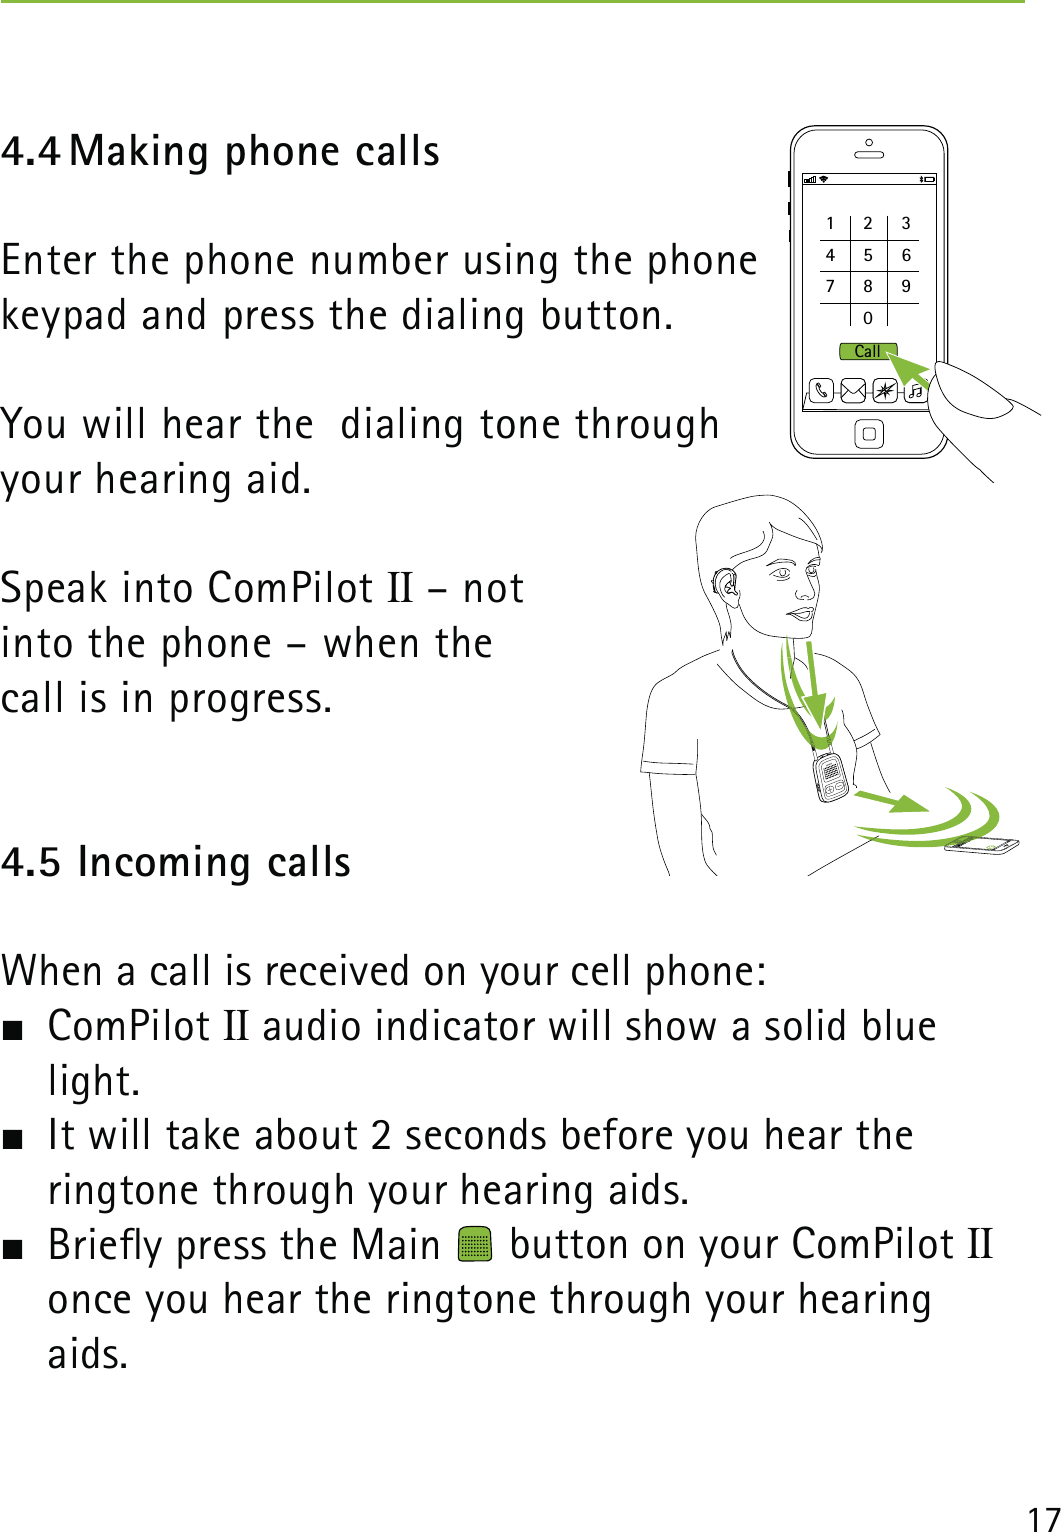 174.4 Making phone callsEnter the phone number using the phone  keypad and press the dialing button.You will hear the  dialing tone through  your hearing aid.Speak into ComPilot II – not  into the phone – when the  call is in progress.4.5 Incoming callsWhen a call is received on your cell phone: ComPilot II audio indicator will show a solid blue light.  It will take about 2 seconds before you hear the  ringtone through your hearing aids.  Briey press the Main   button on your ComPilot II once you hear the ringtone through your hearing aids. 1234567809Call